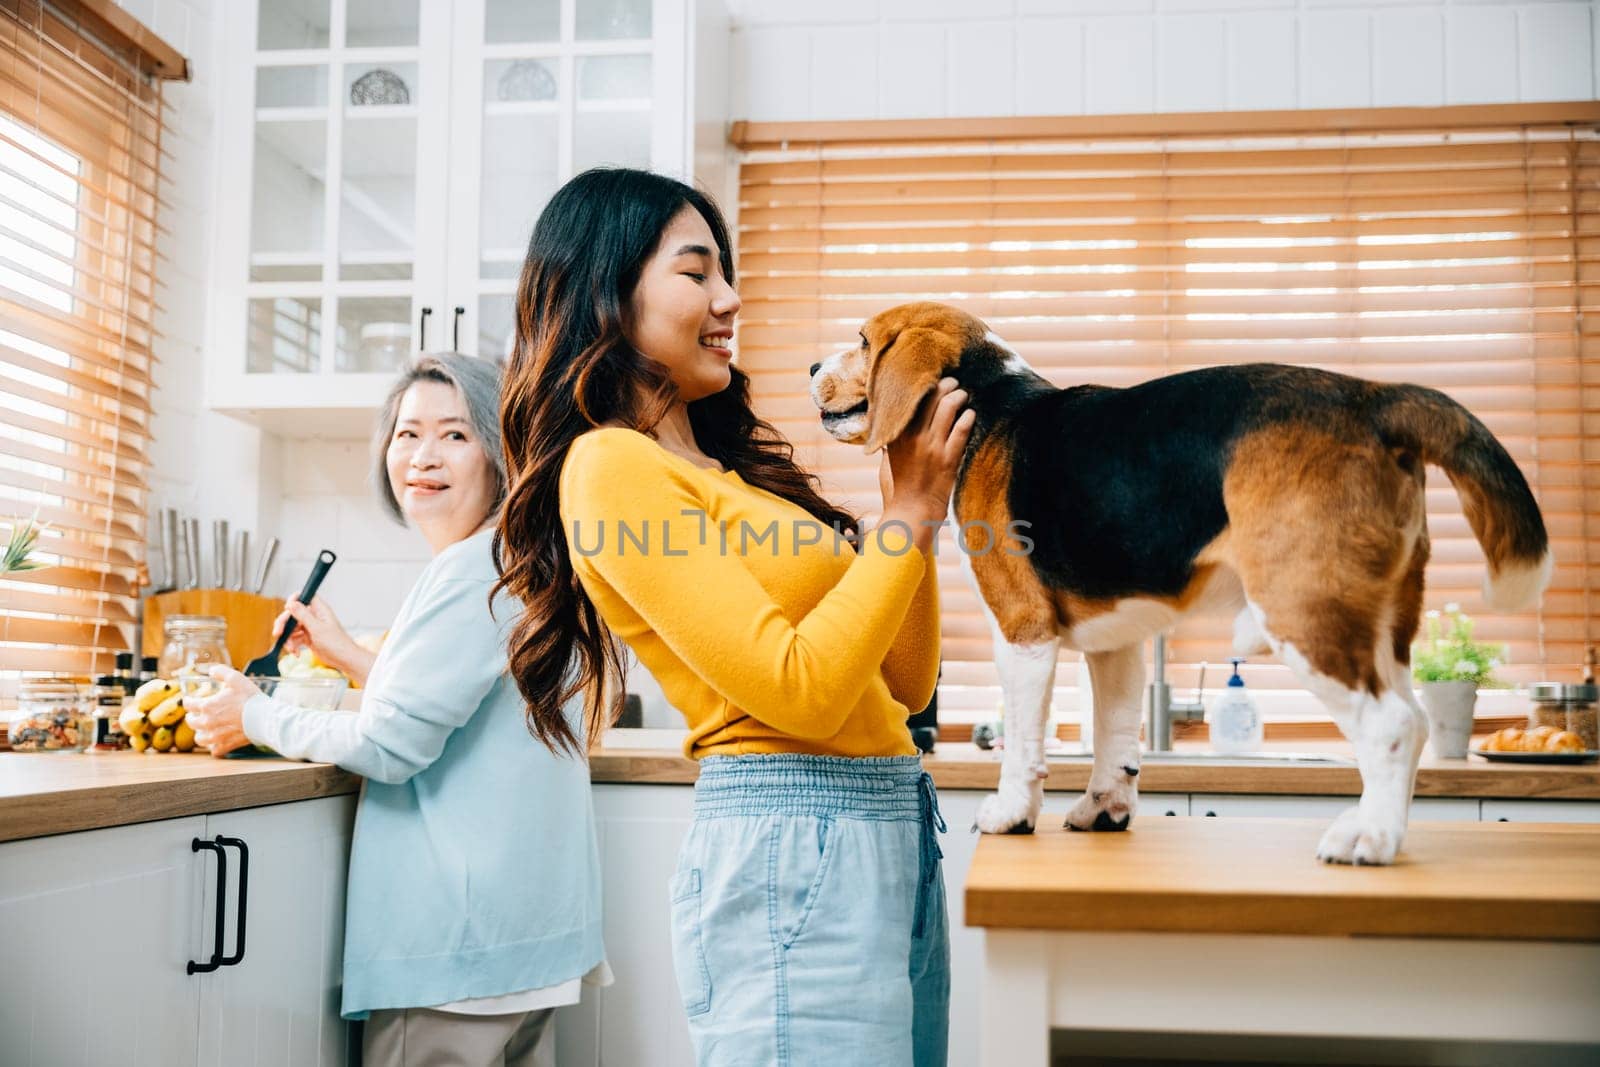 In the kitchen, a senior Asian woman, her daughter, and young woman find joy playing with their Beagle dog, emphasizing the togetherness, togetherness, and enjoyment of pet ownership.